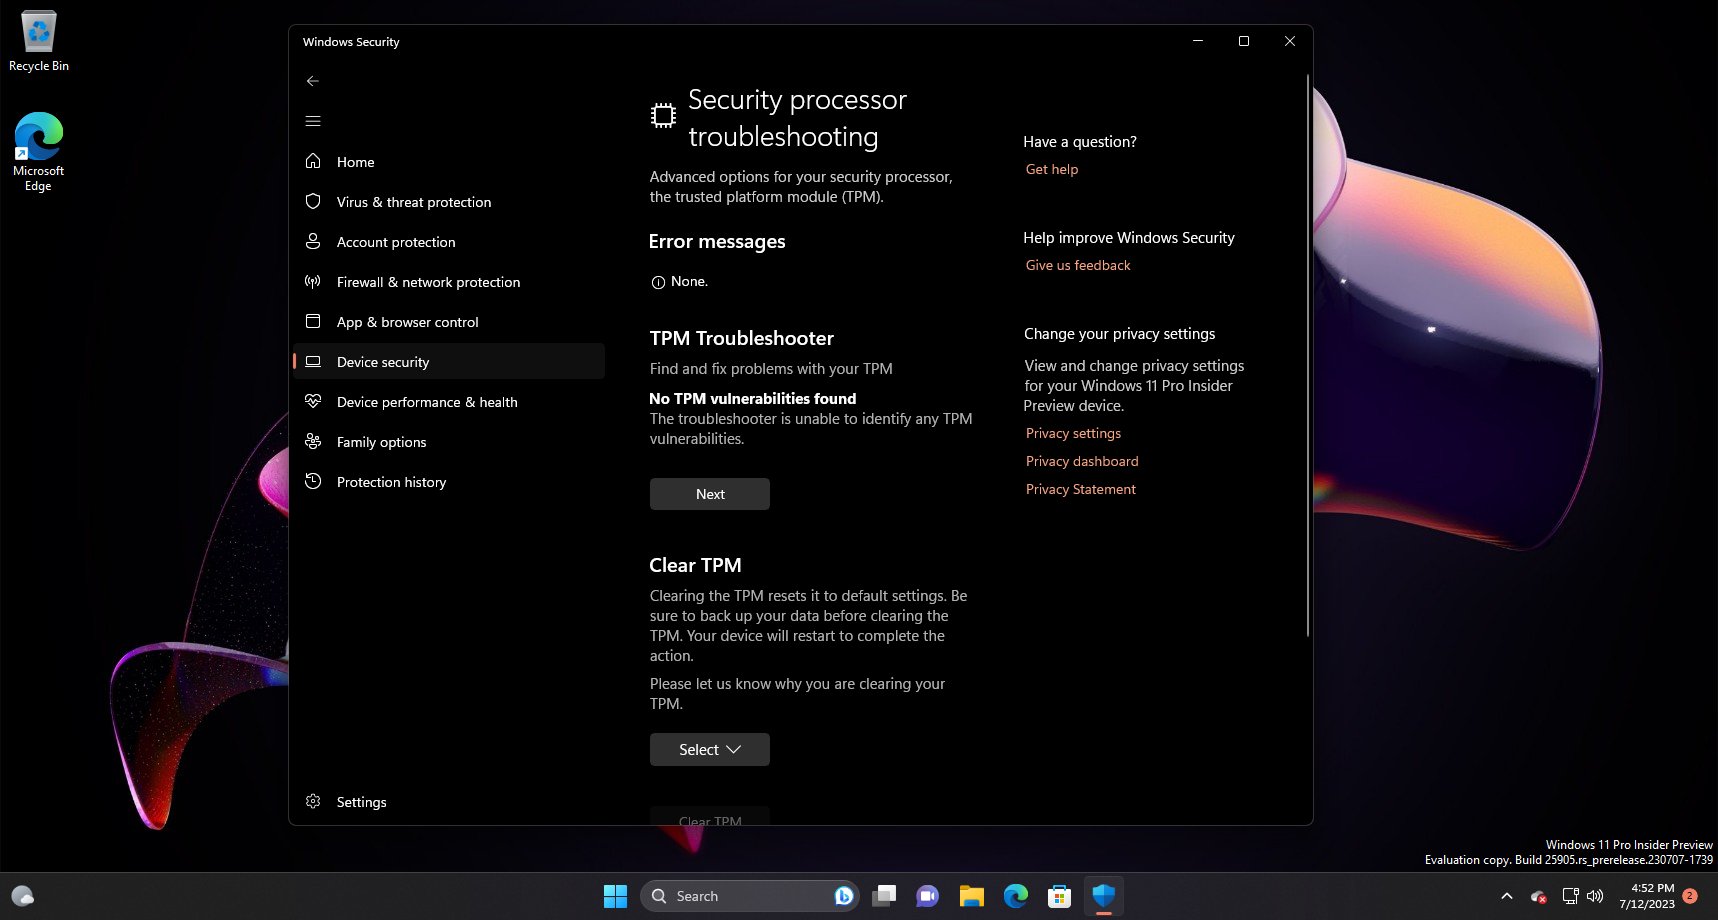  Microsoft Introduces TPM Troubleshooter Tool to Address Windows 11 Security Concerns